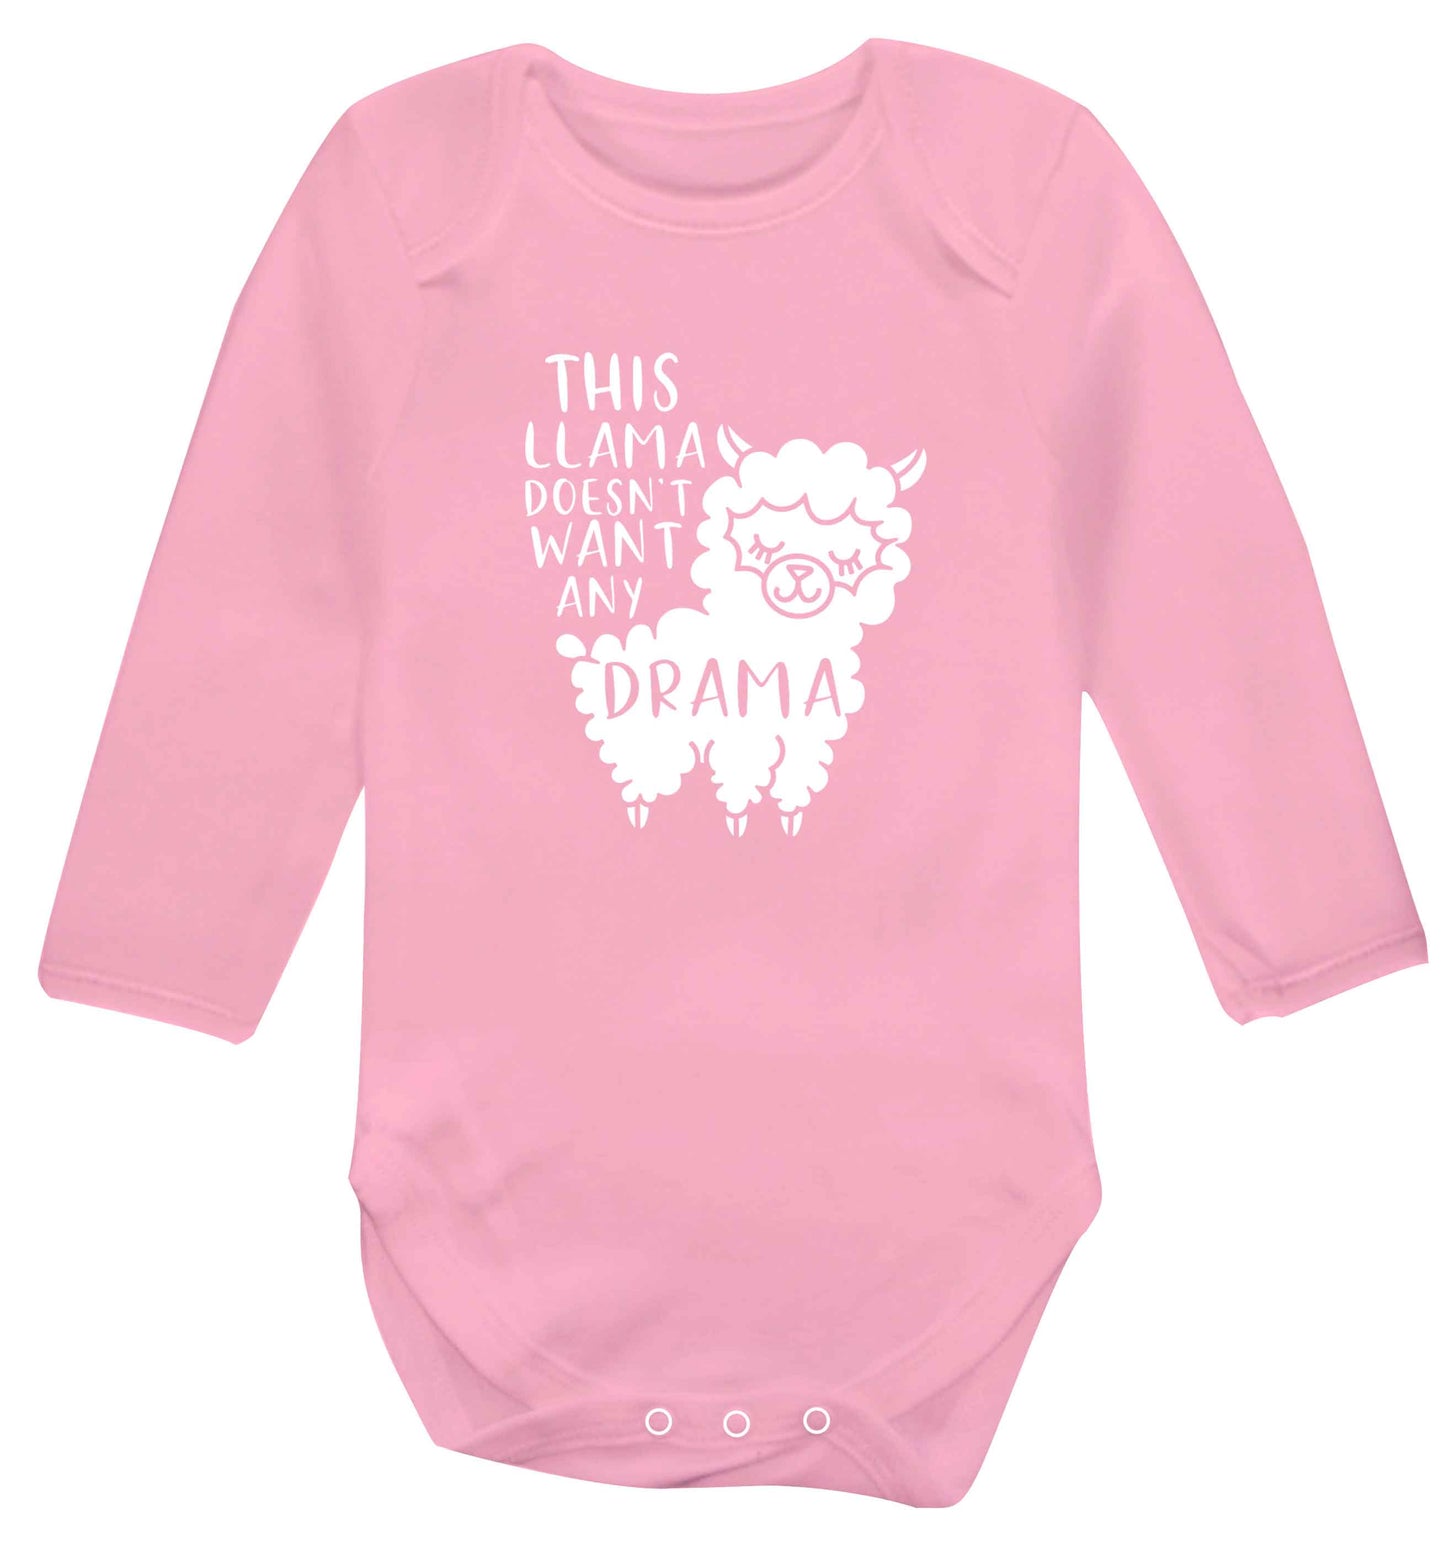 This Llama doesn't want any drama baby vest long sleeved pale pink 6-12 months